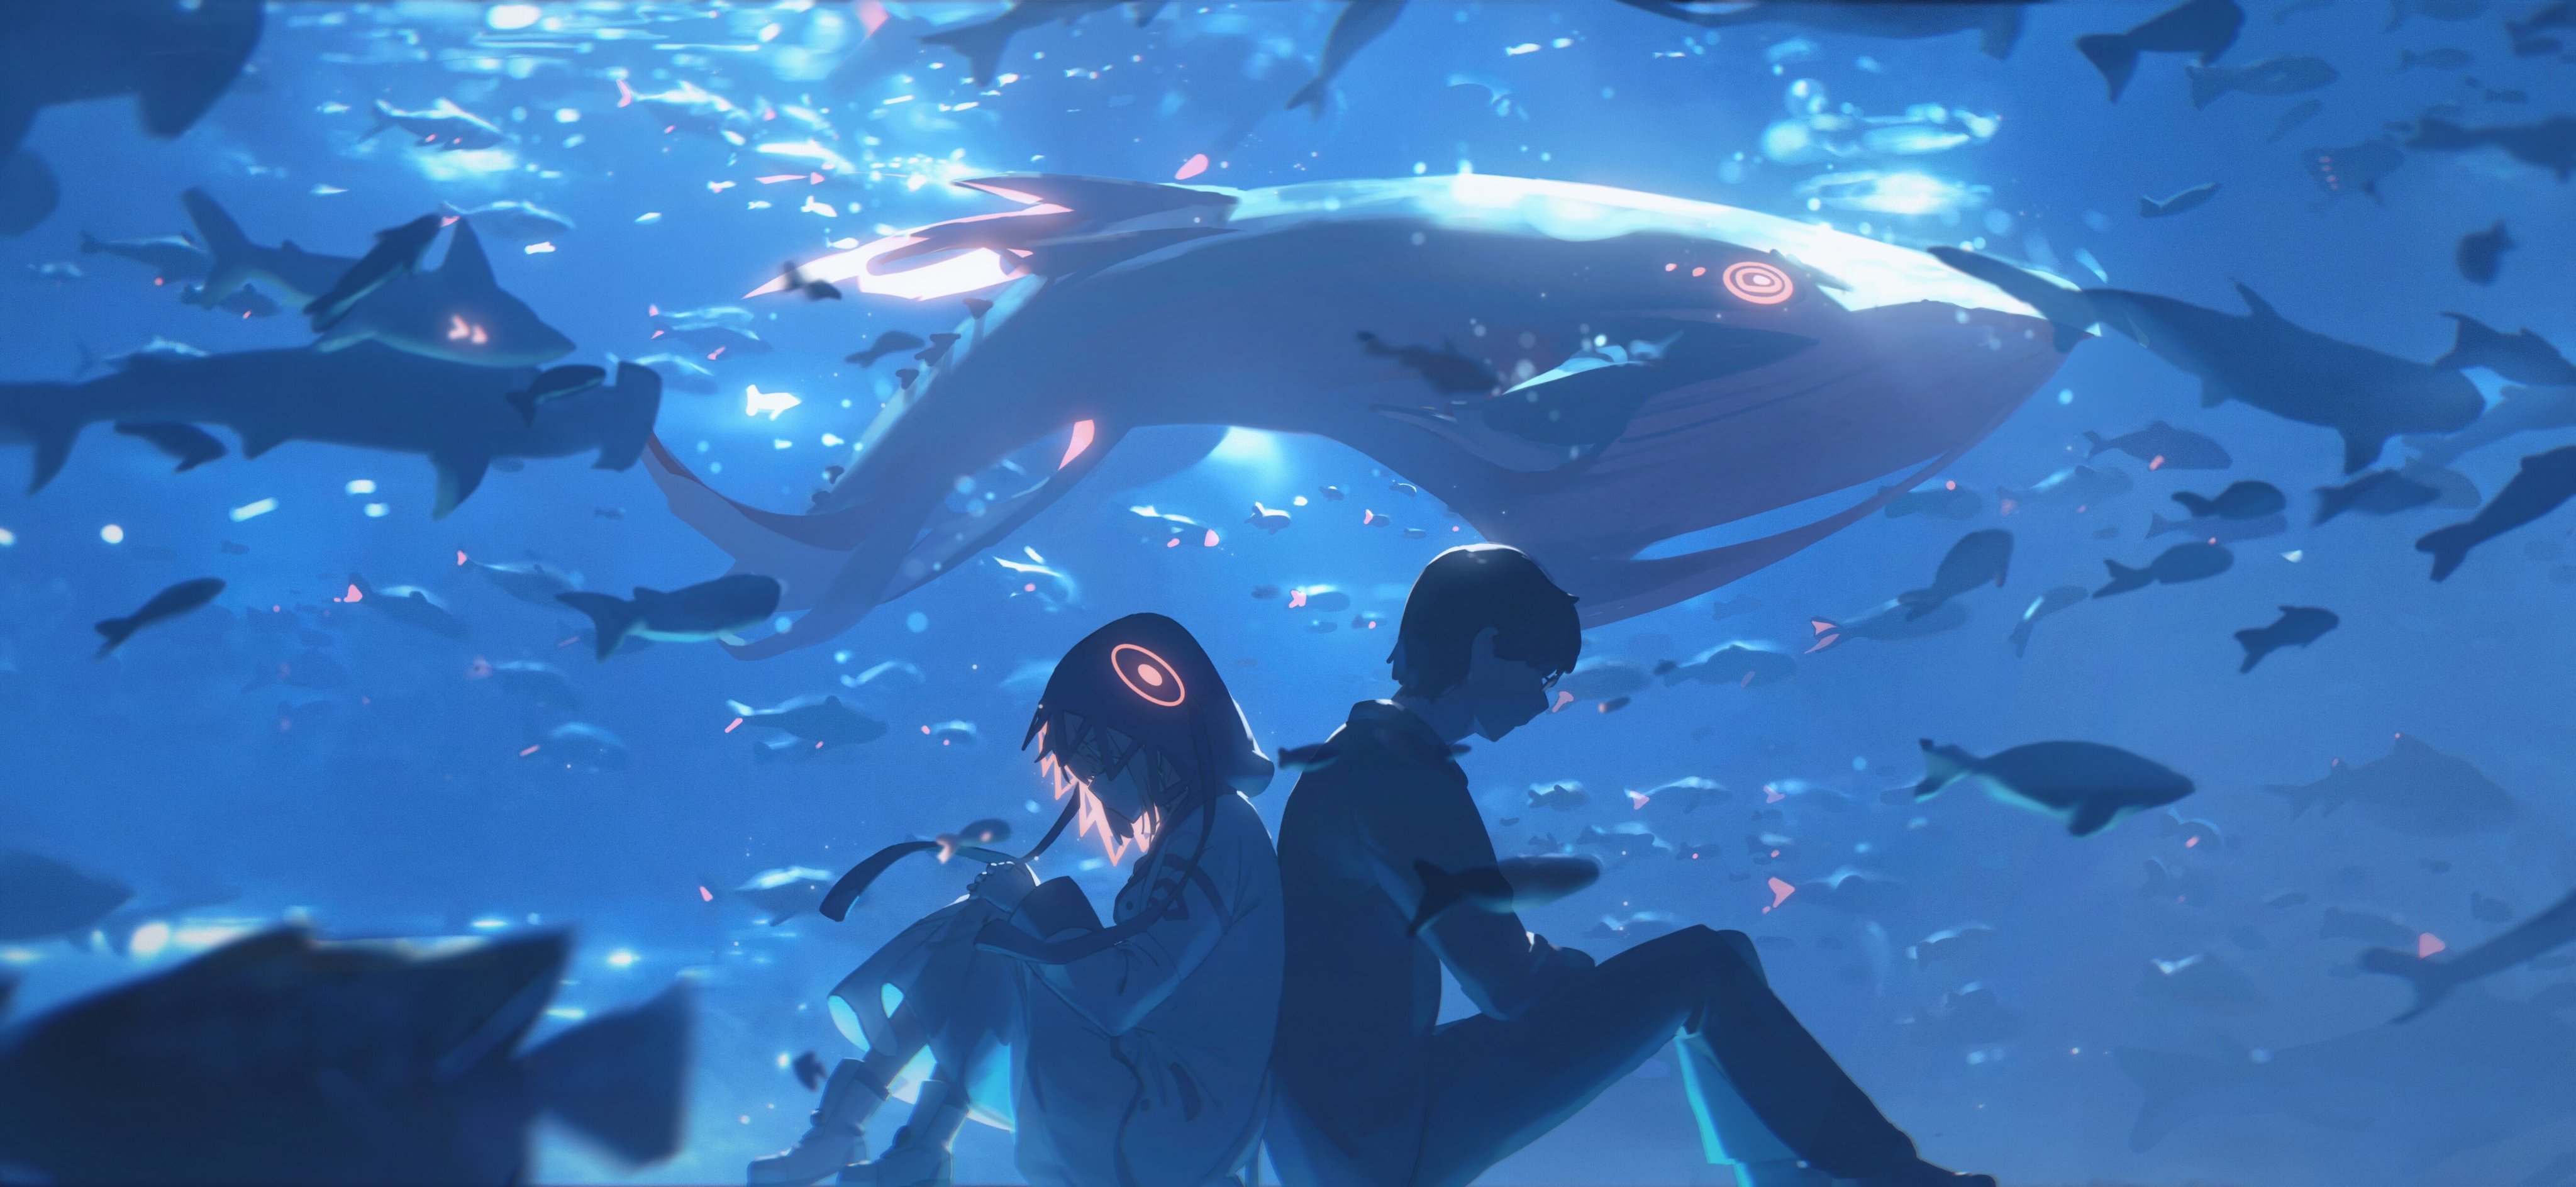 Underwater Whale Anime Boys Anime Girls Water Animals Back To Back 4096x1887